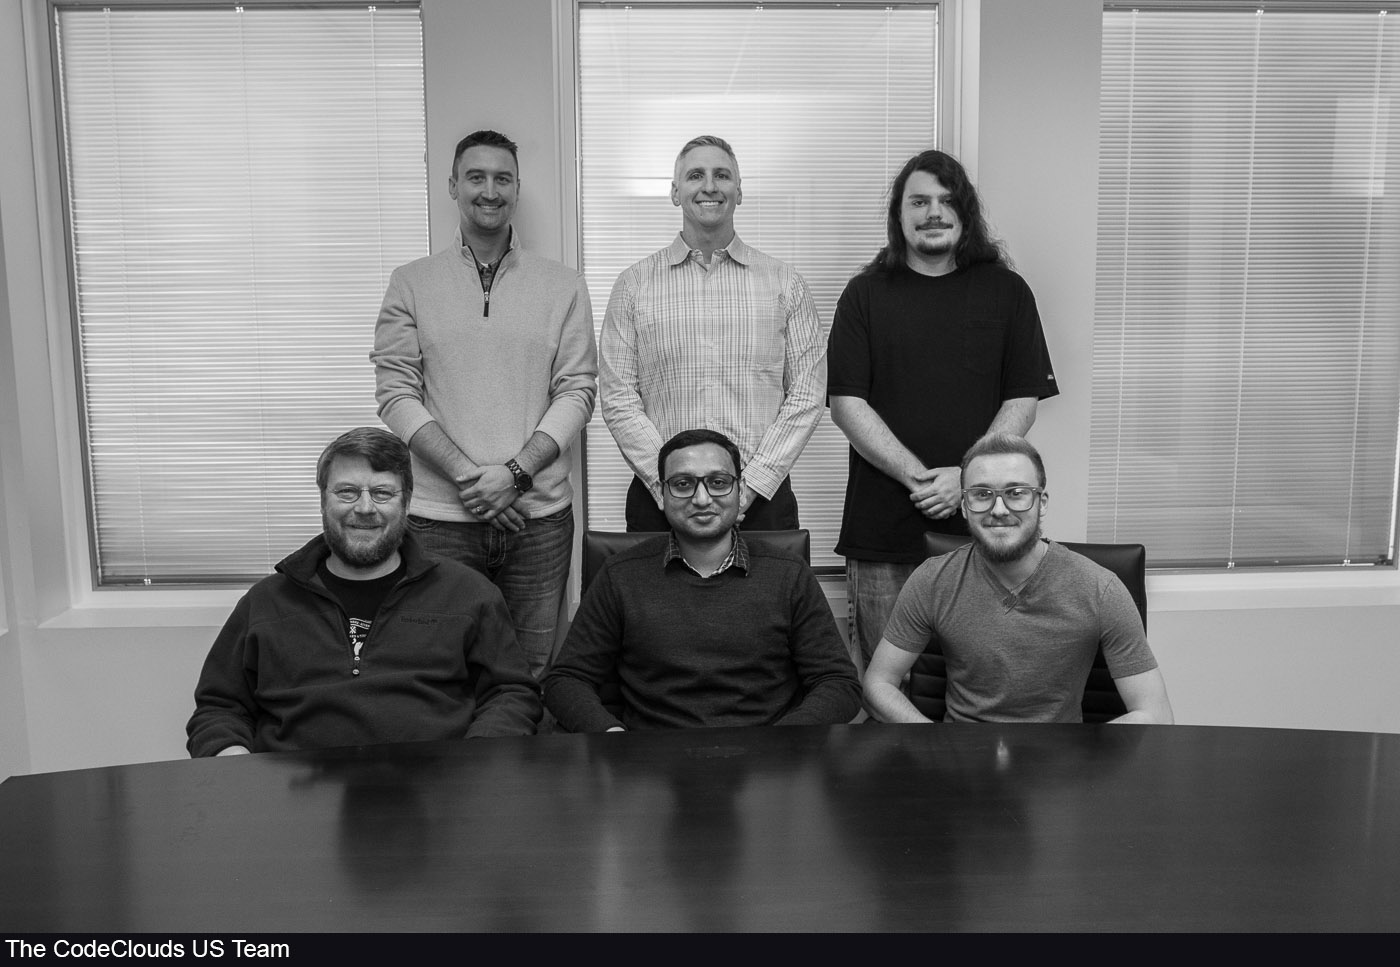 The CodeClouds US Team